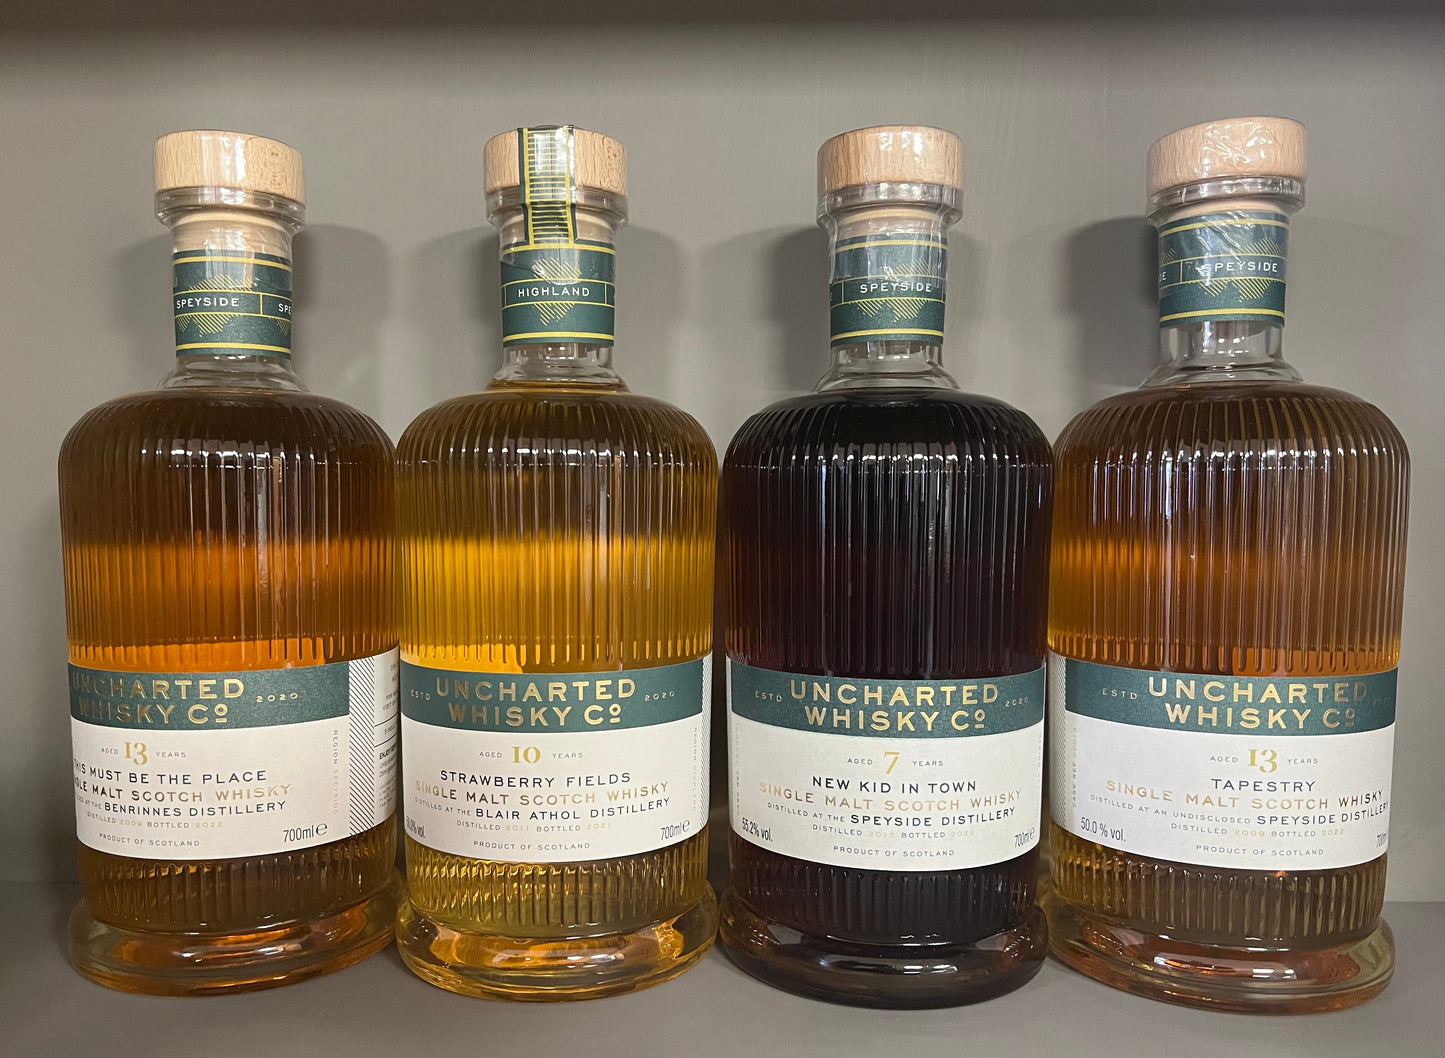 Uncharted Whisky Co. Whisky Sampler Set REV#3 (Contains 4 x 5cl Speyside / Highland Malts)